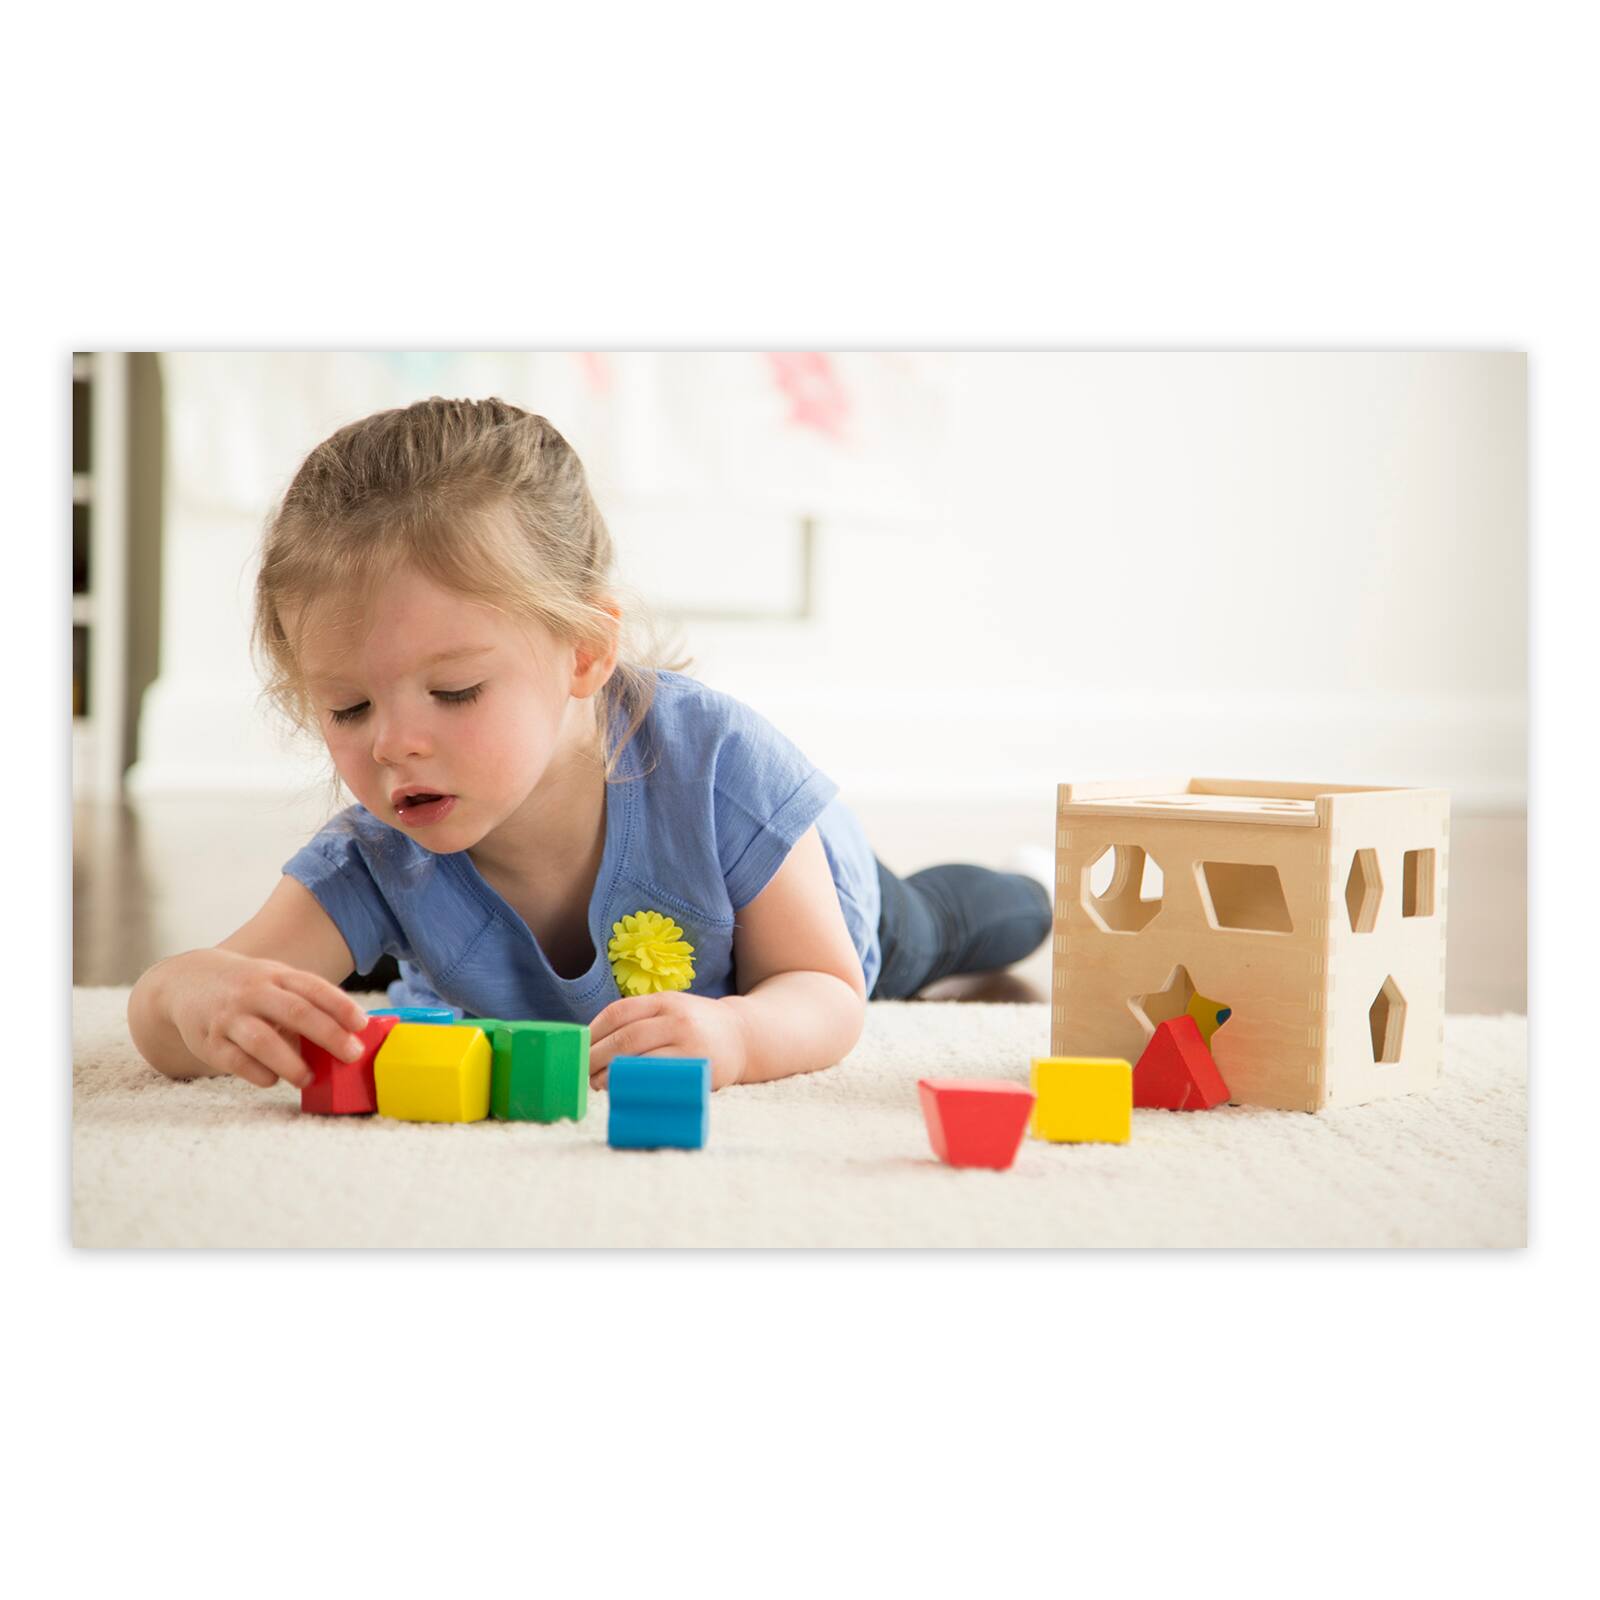 melissa & doug shape sorting cube classic wooden toy